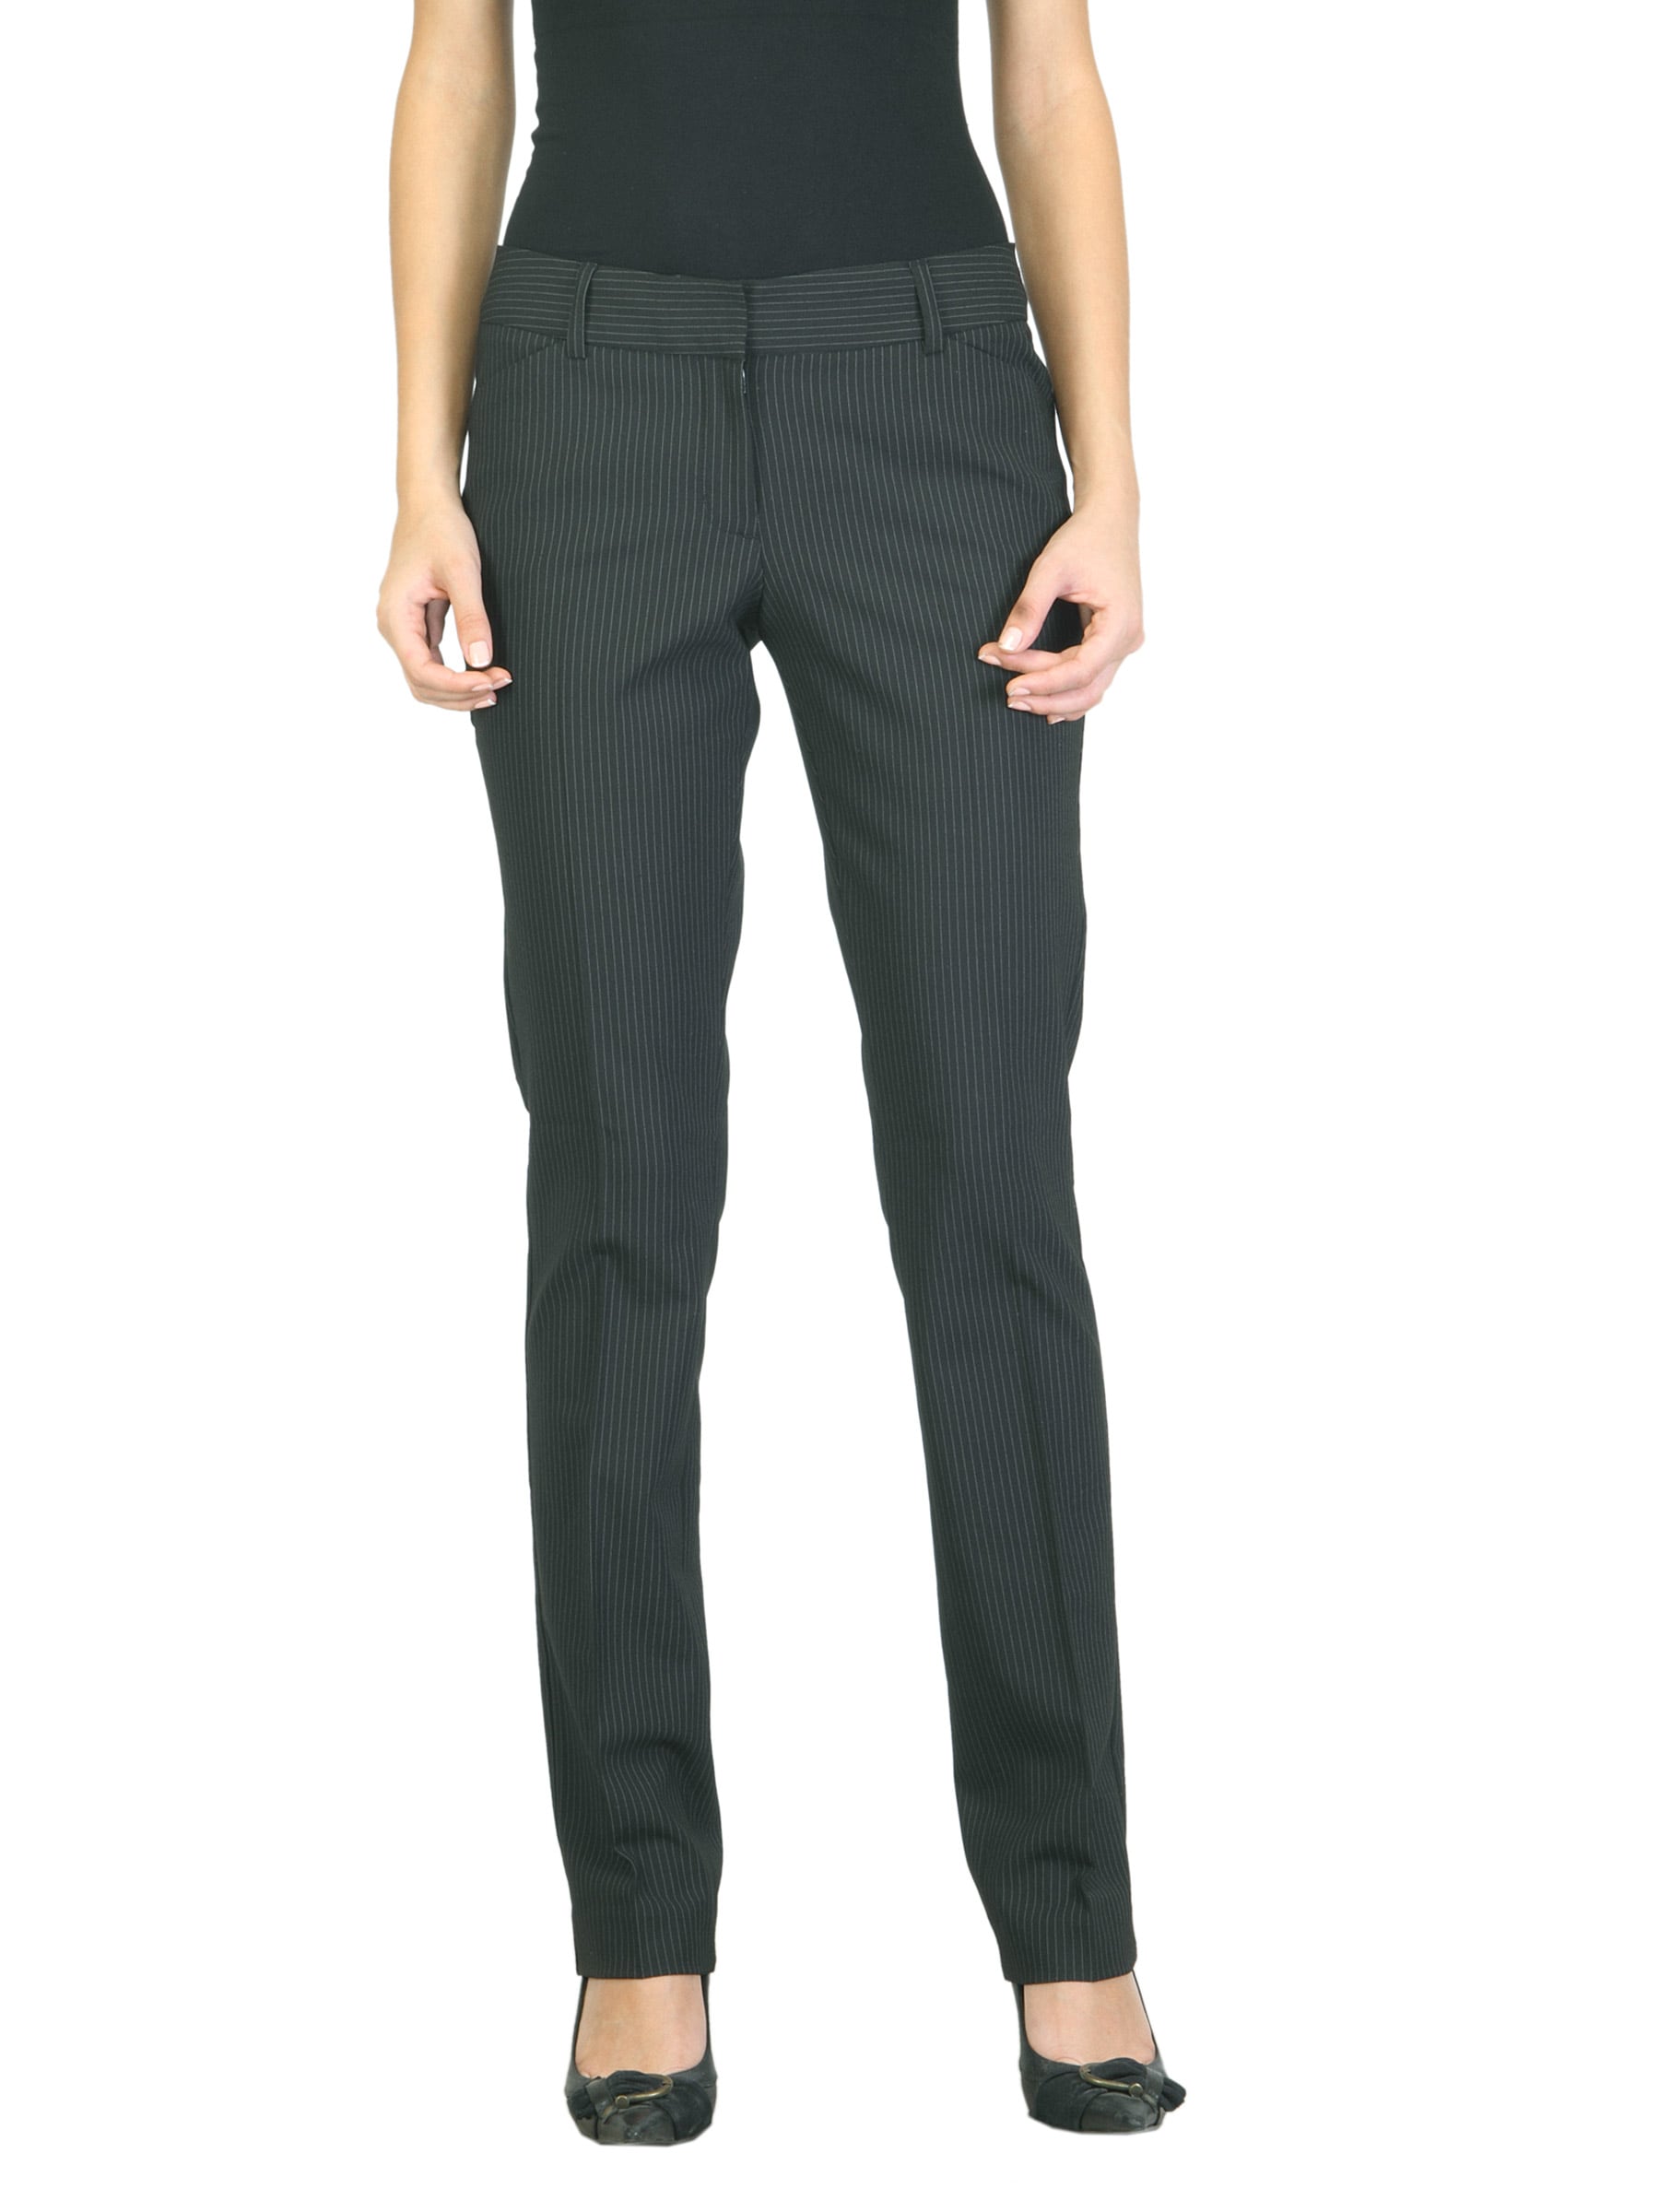 Scullers For Her Women Striped Black Trousers